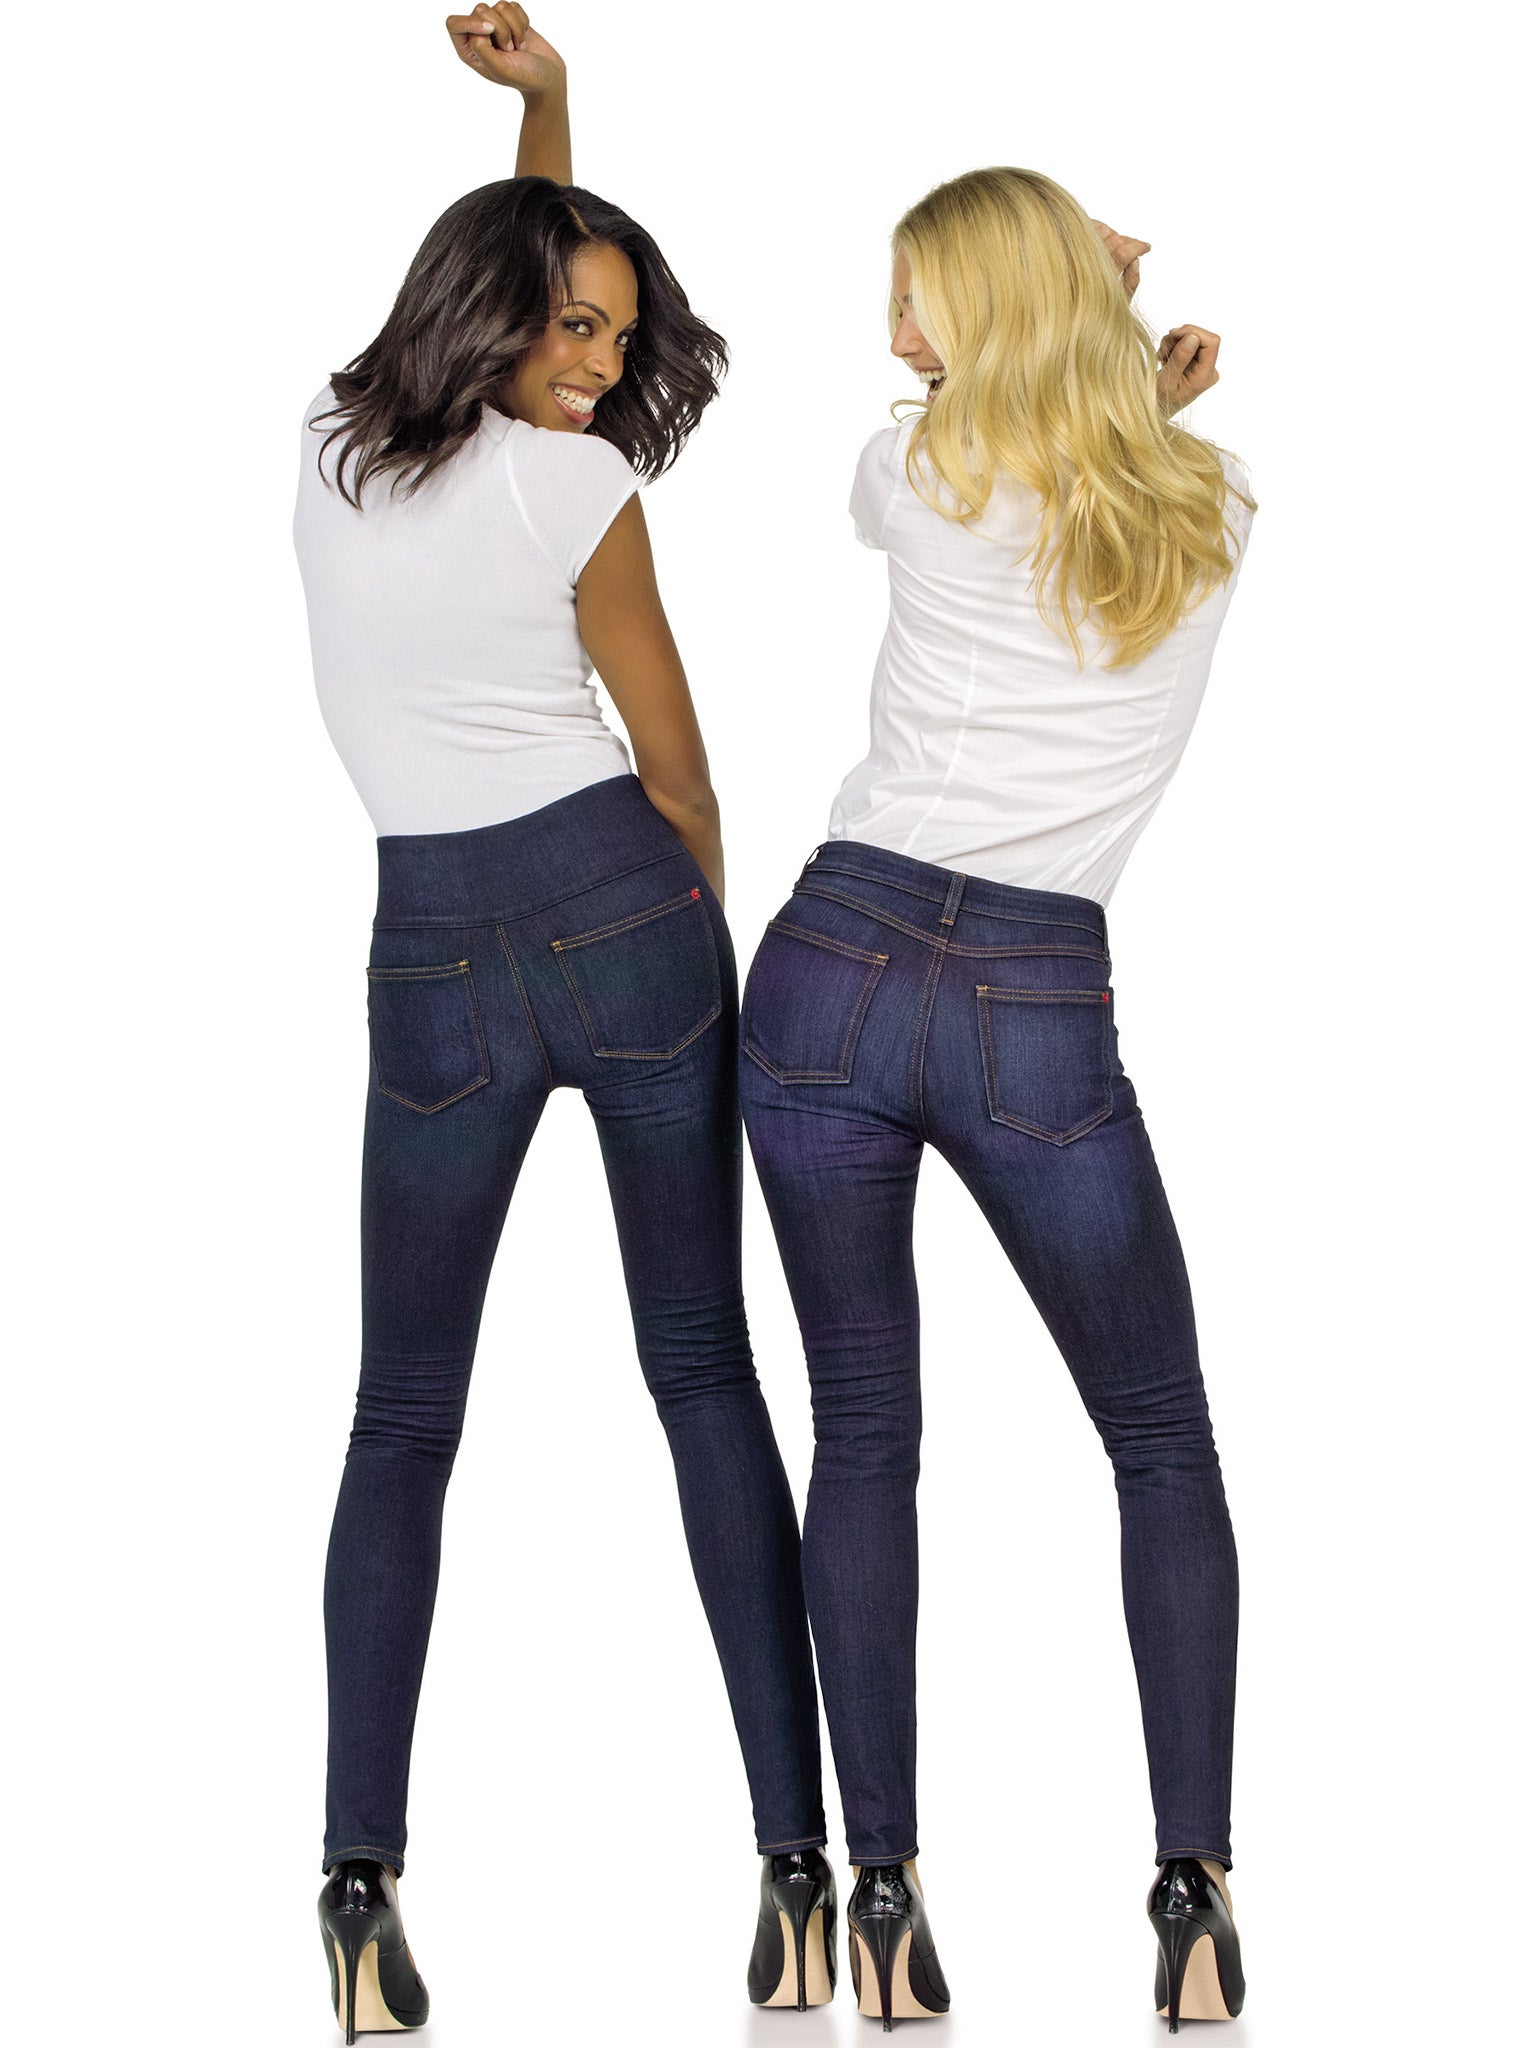 Billionaire founder of Spanx launches range of jeans that offers